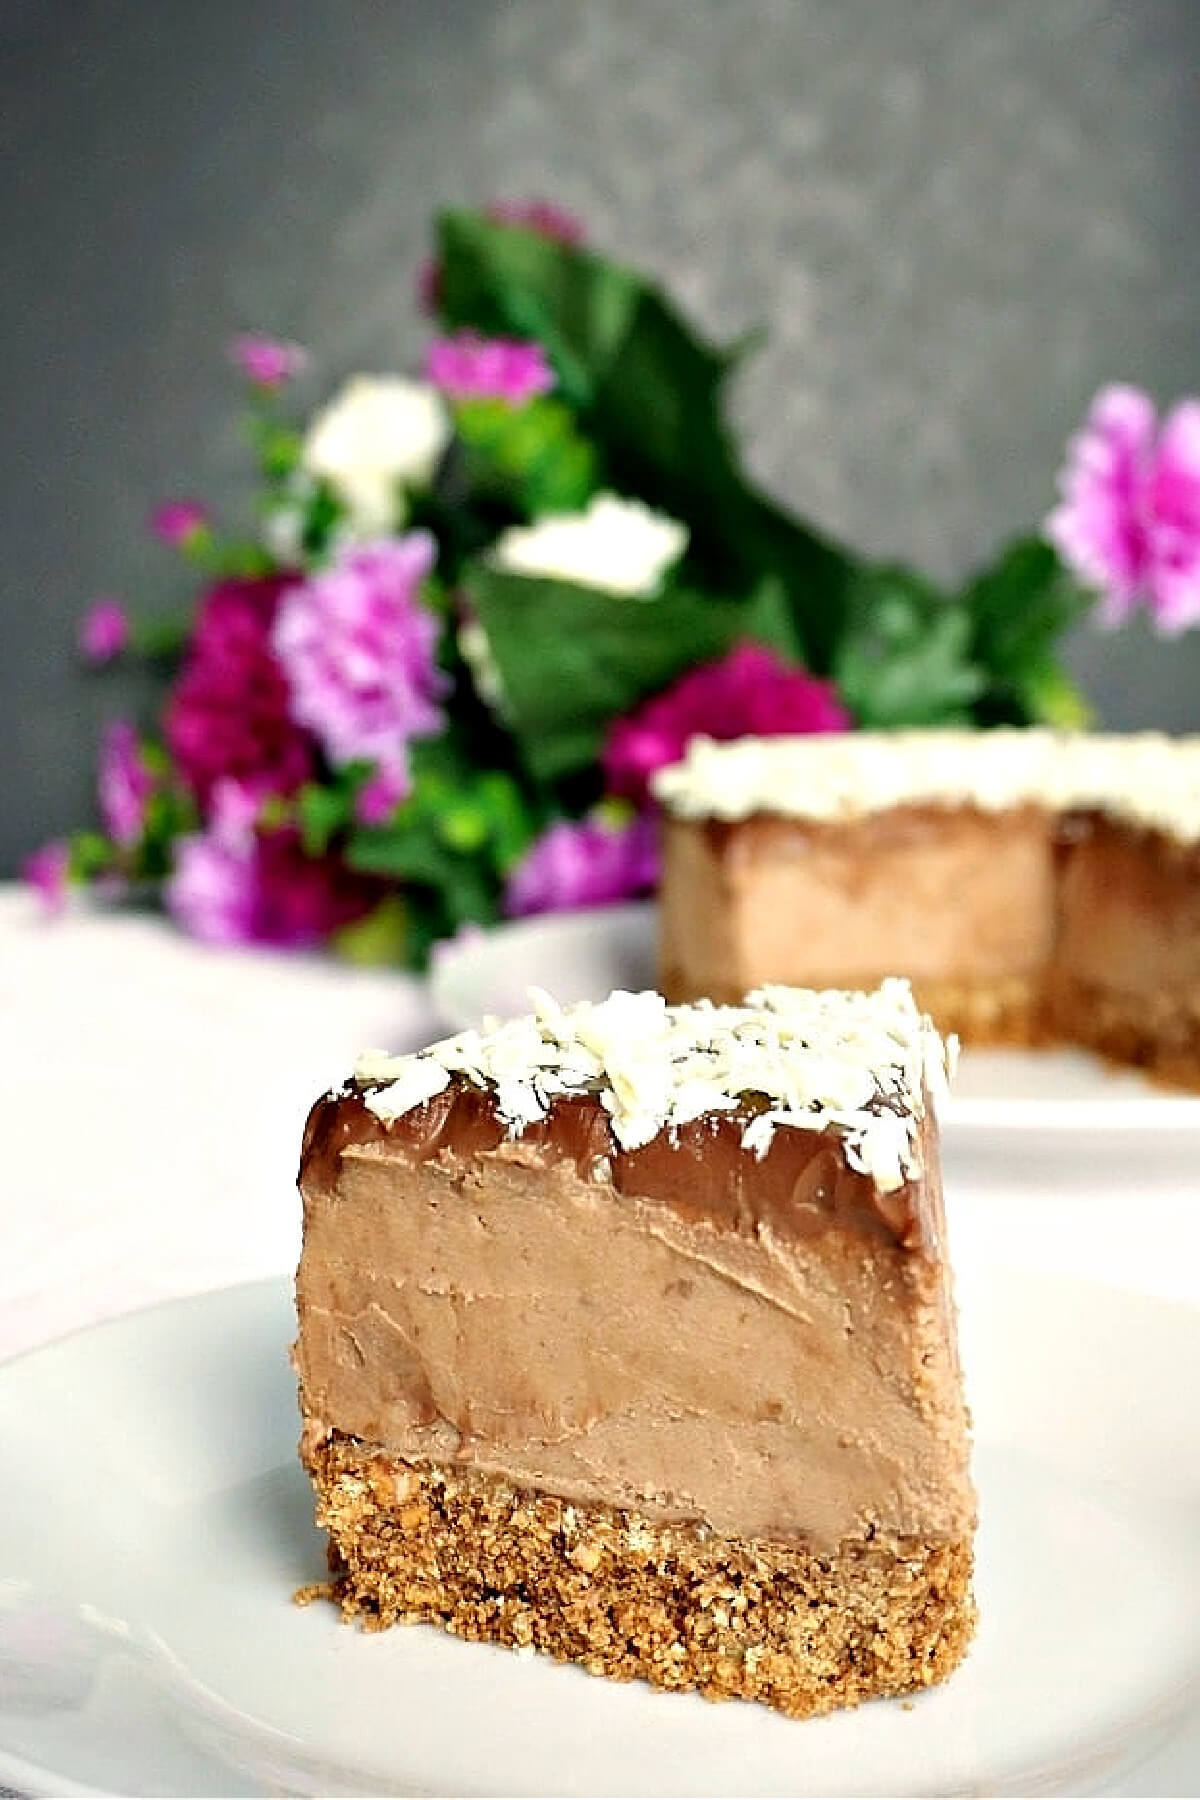 A slice of chocolate cheesecake on a white plate.